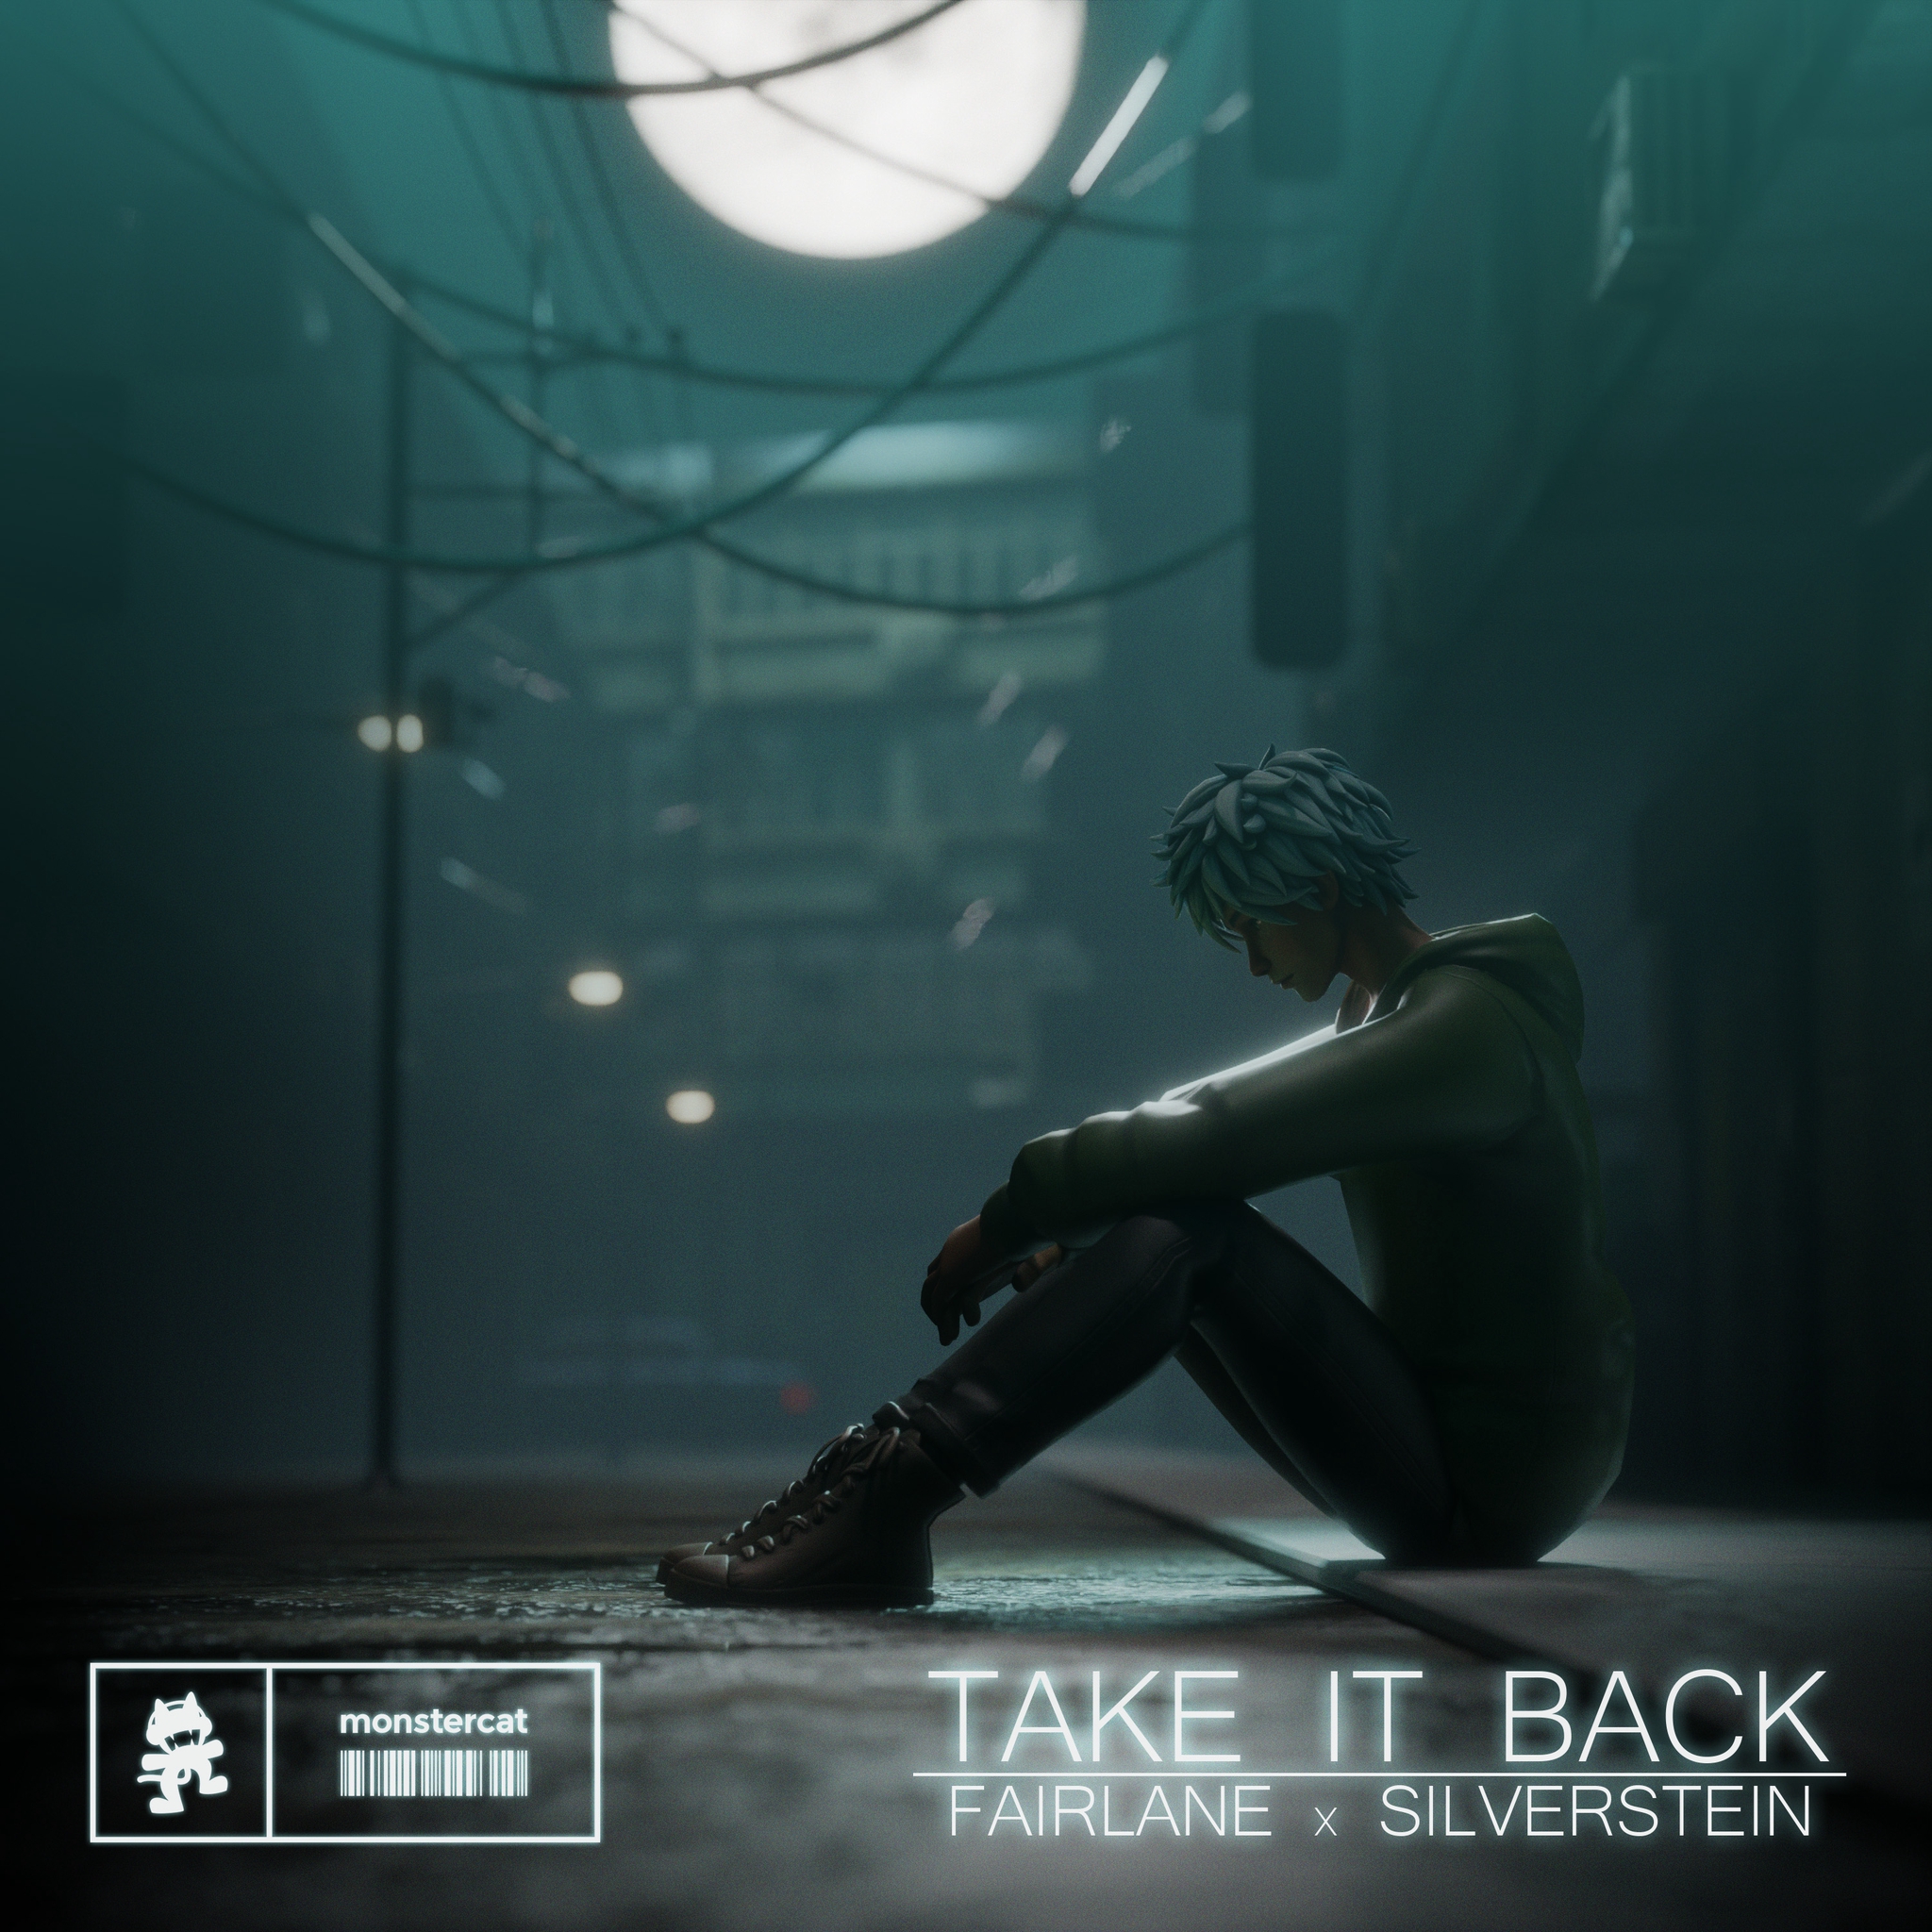 Fairlane And Silverstein Can’t “Take It Back”